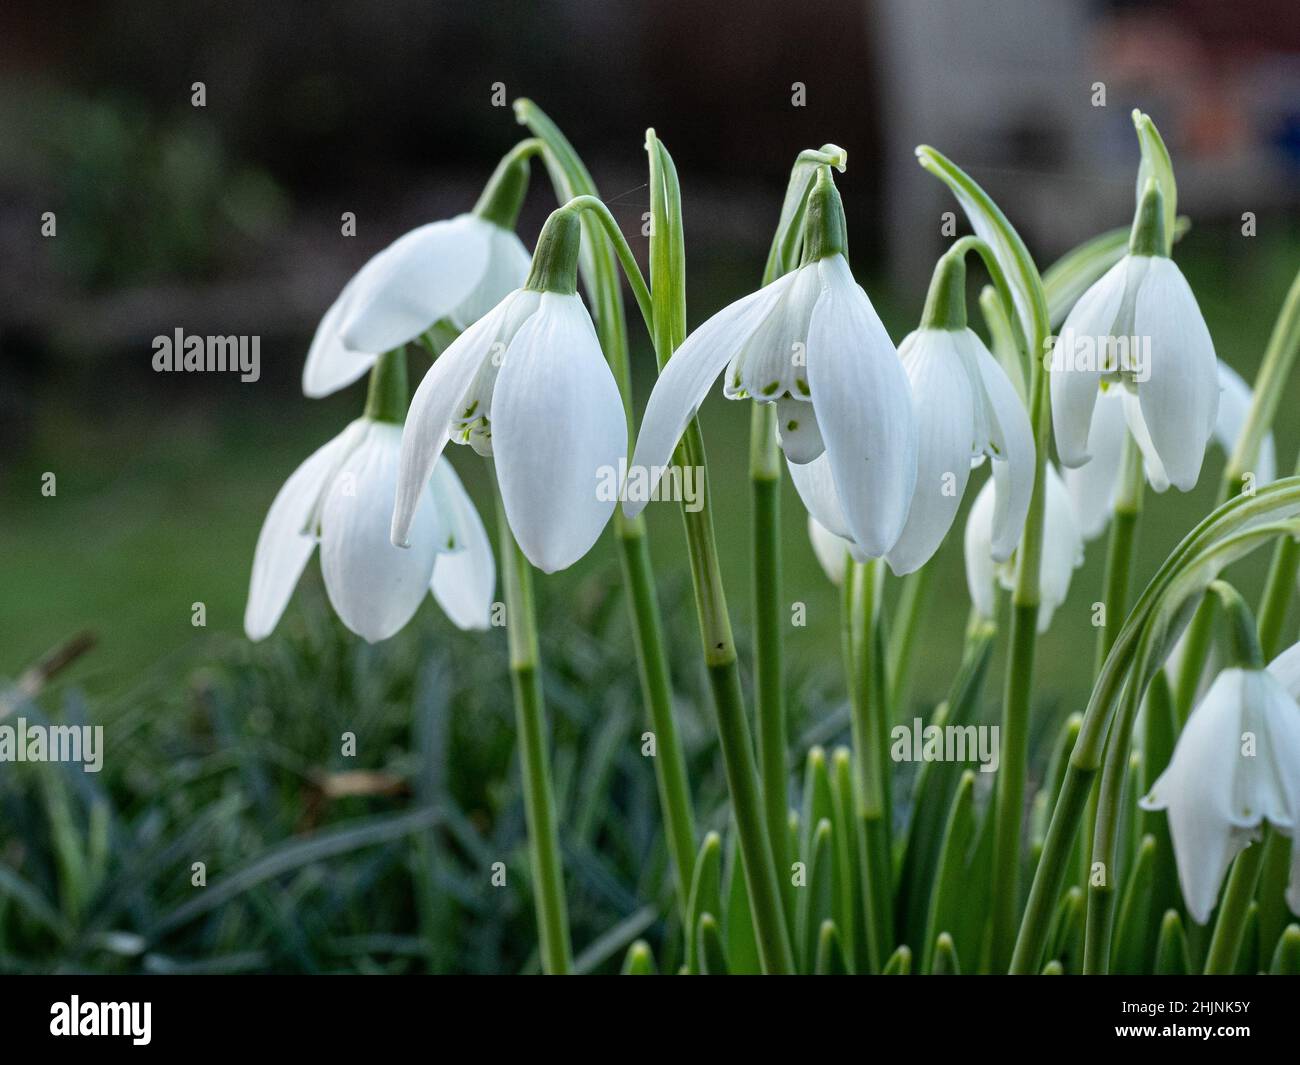 A close up of a group of the double white green tipped flowers of Galanthus 'Lady Beatrix Stanley' Stock Photo